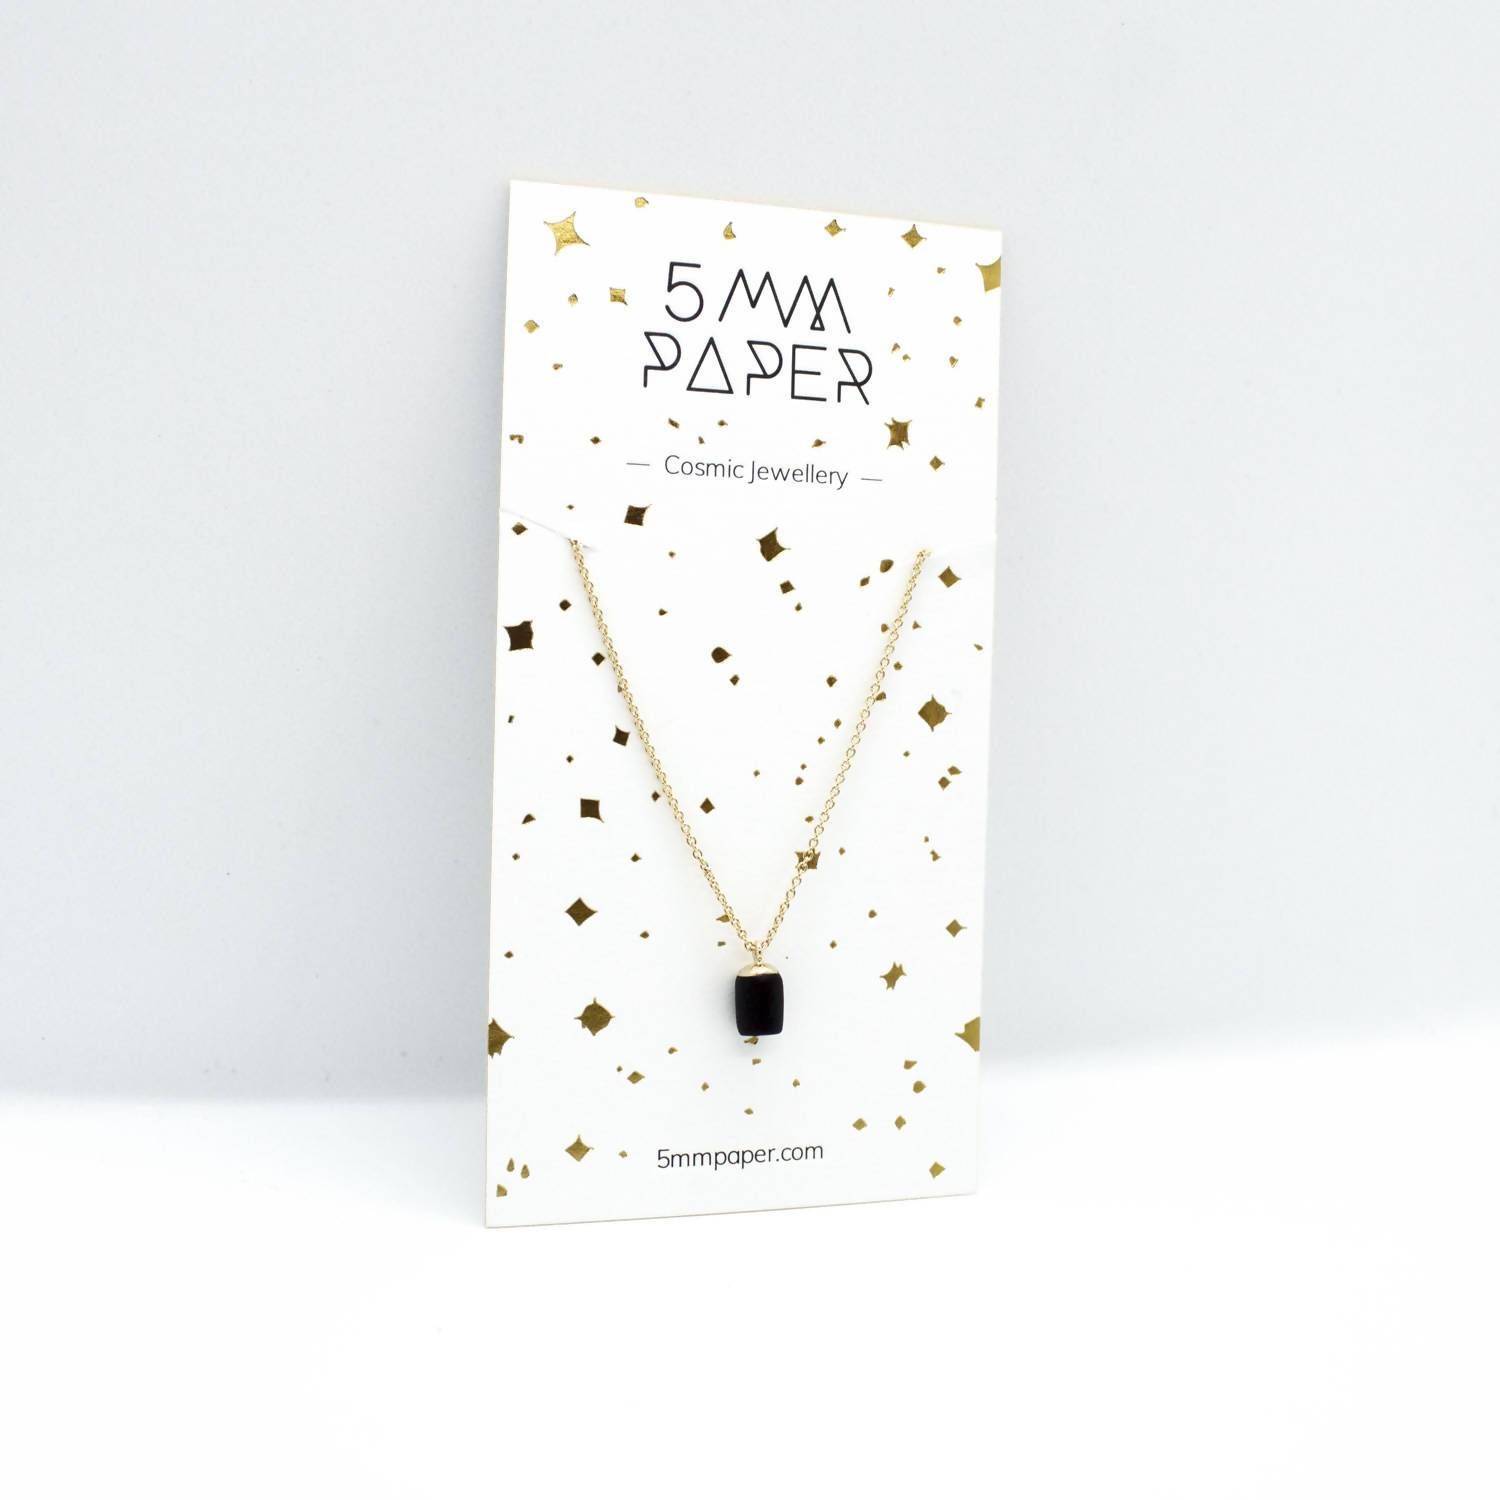 Gold Necklace - Tiny Weight Charm Necklaces 5mm Paper 